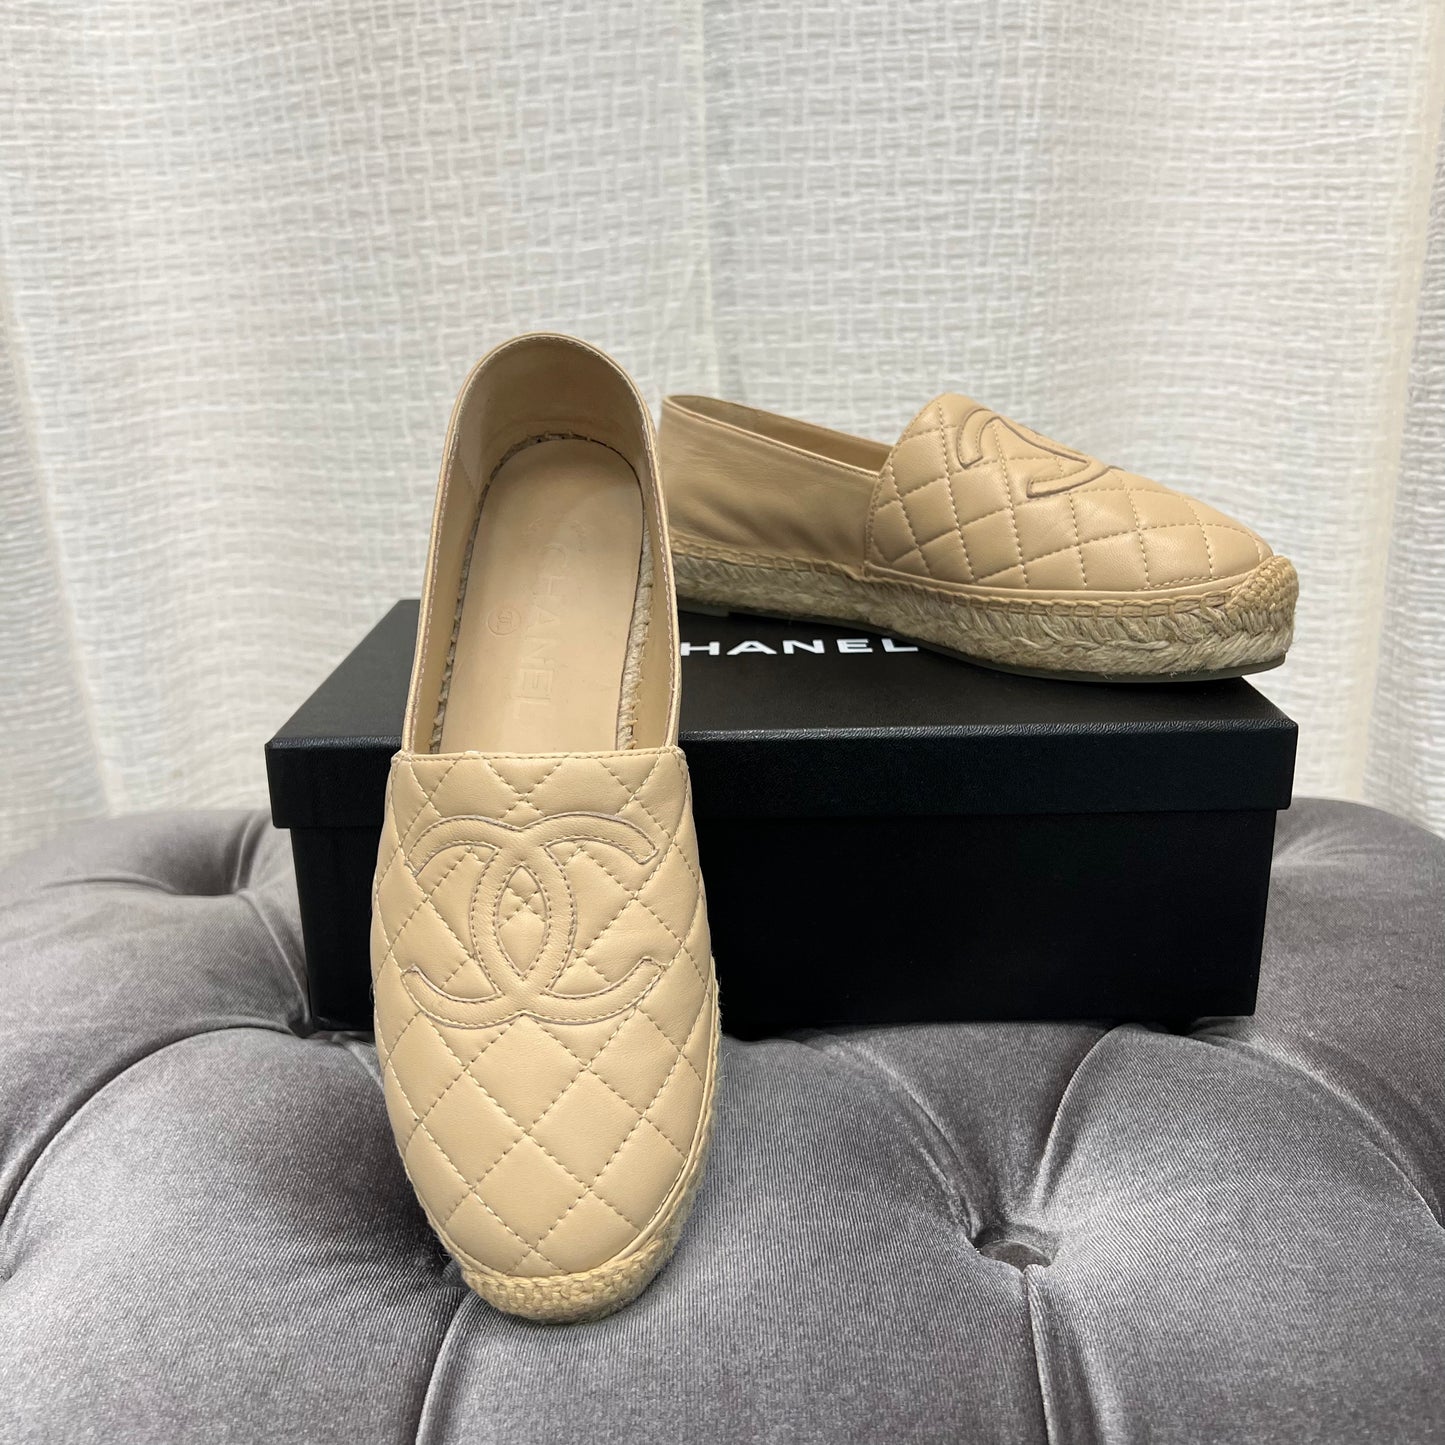 Chanel Beige Leather Quilted Espadrilles, Size 37